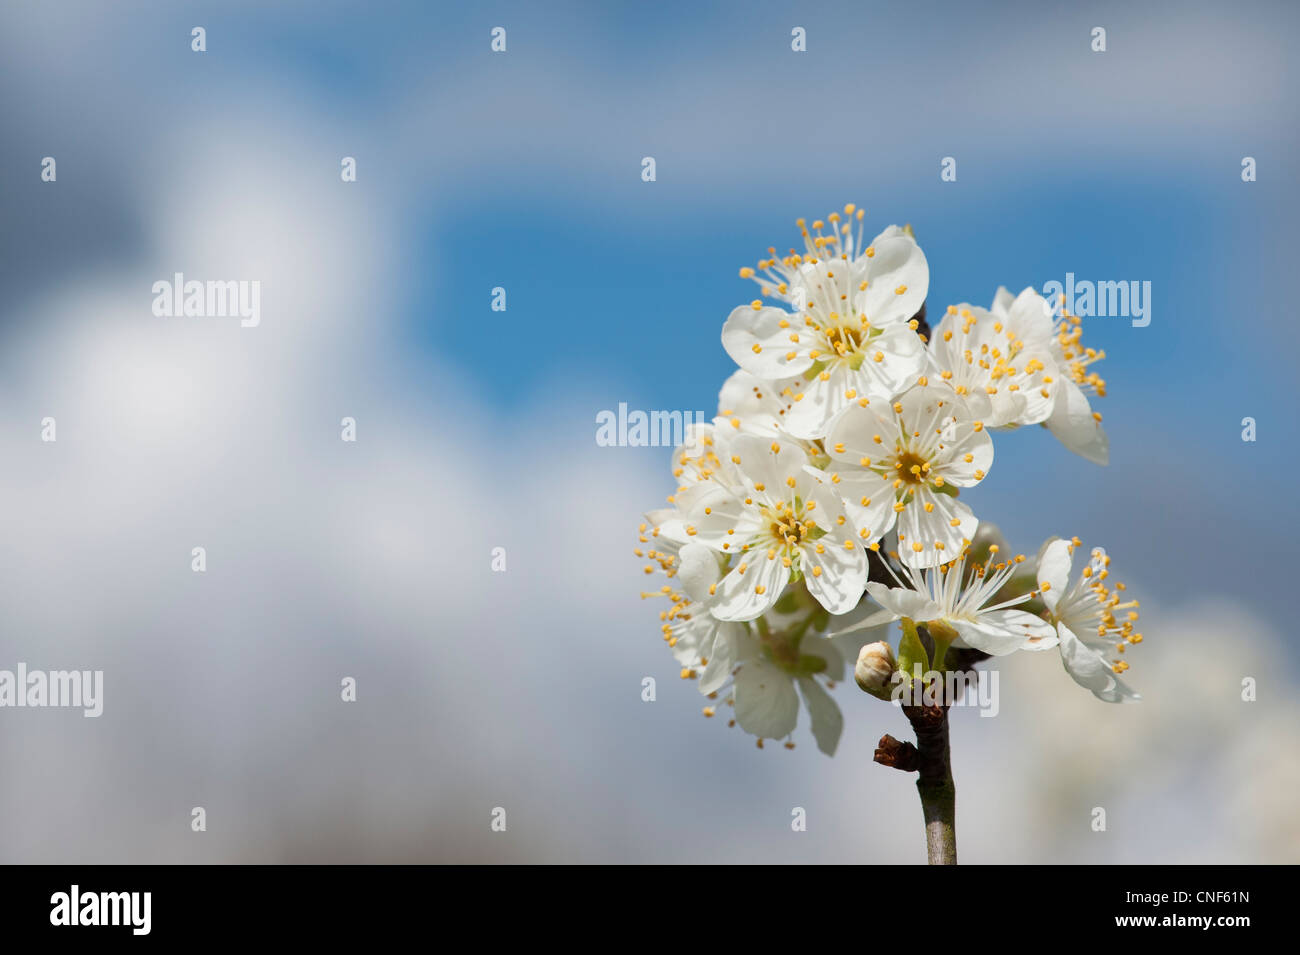 Malus domestica. Apple Tree blossom against blue cloudy sky Stock Photo